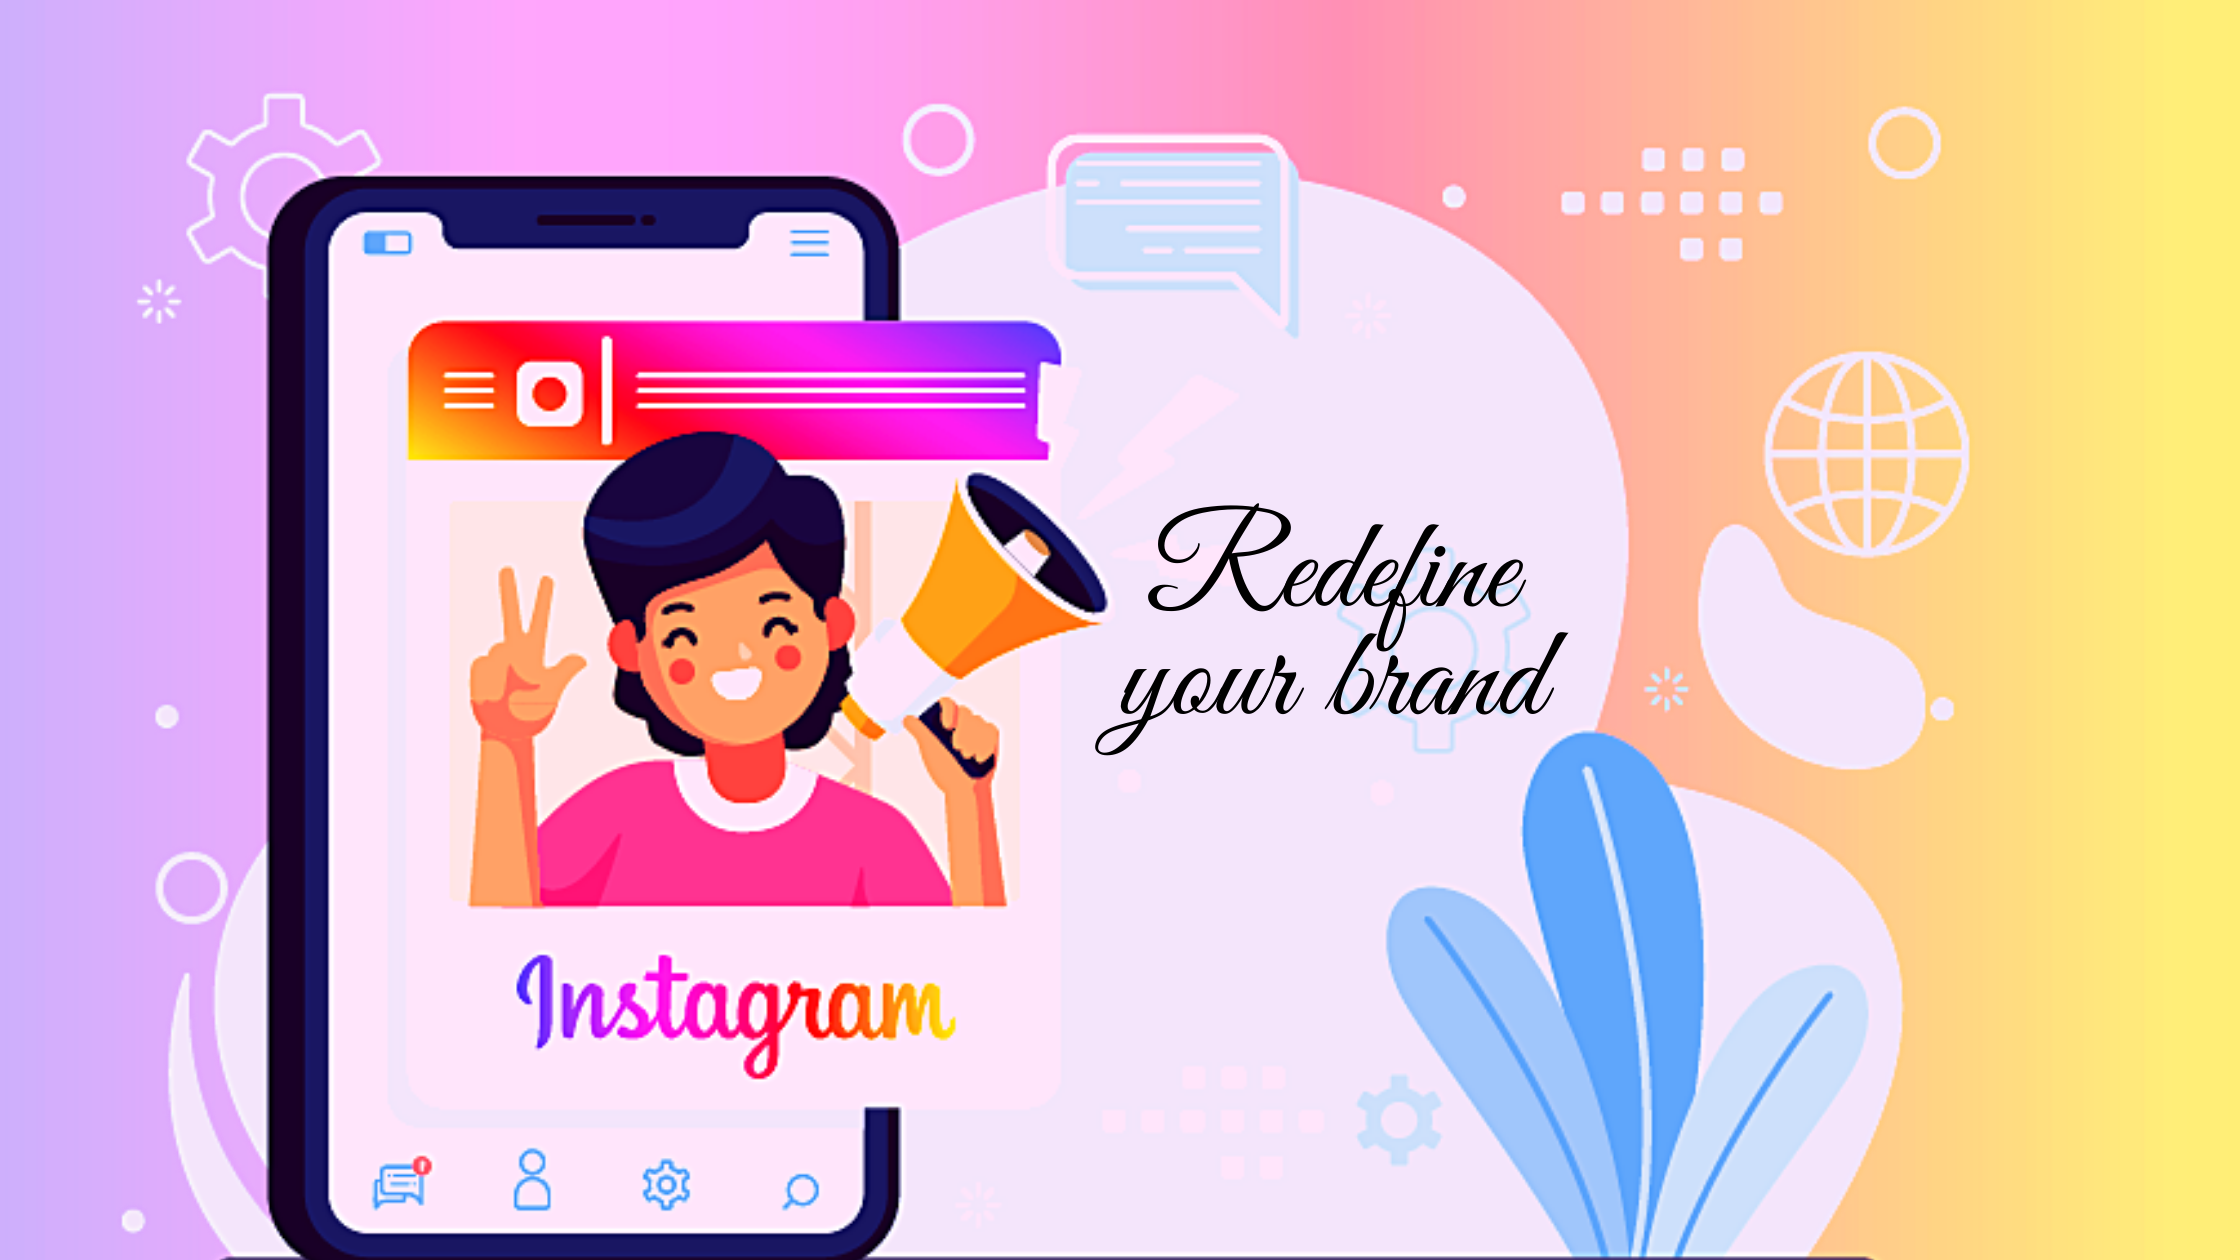 Instagram can redefine your brand